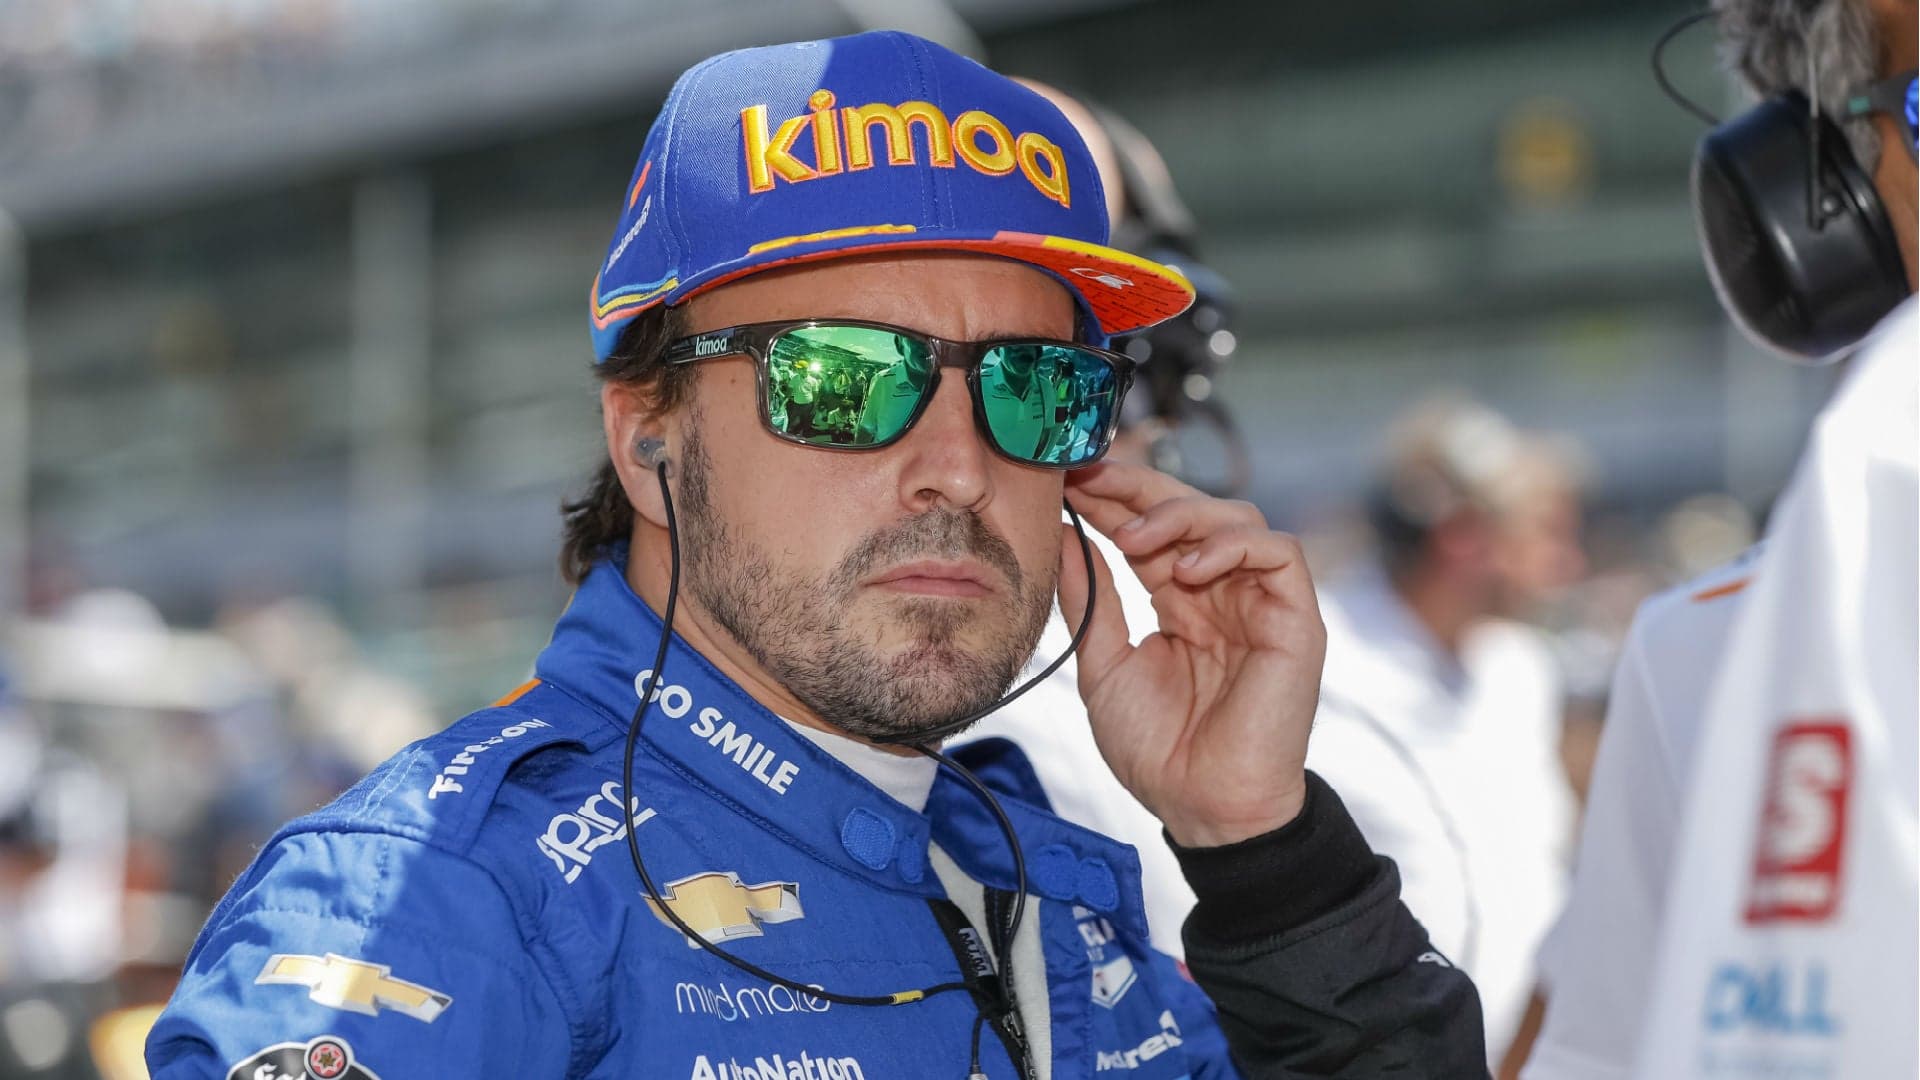 Fernando Alonso to Race in 2020 Indy 500 With Arrow McLaren SP